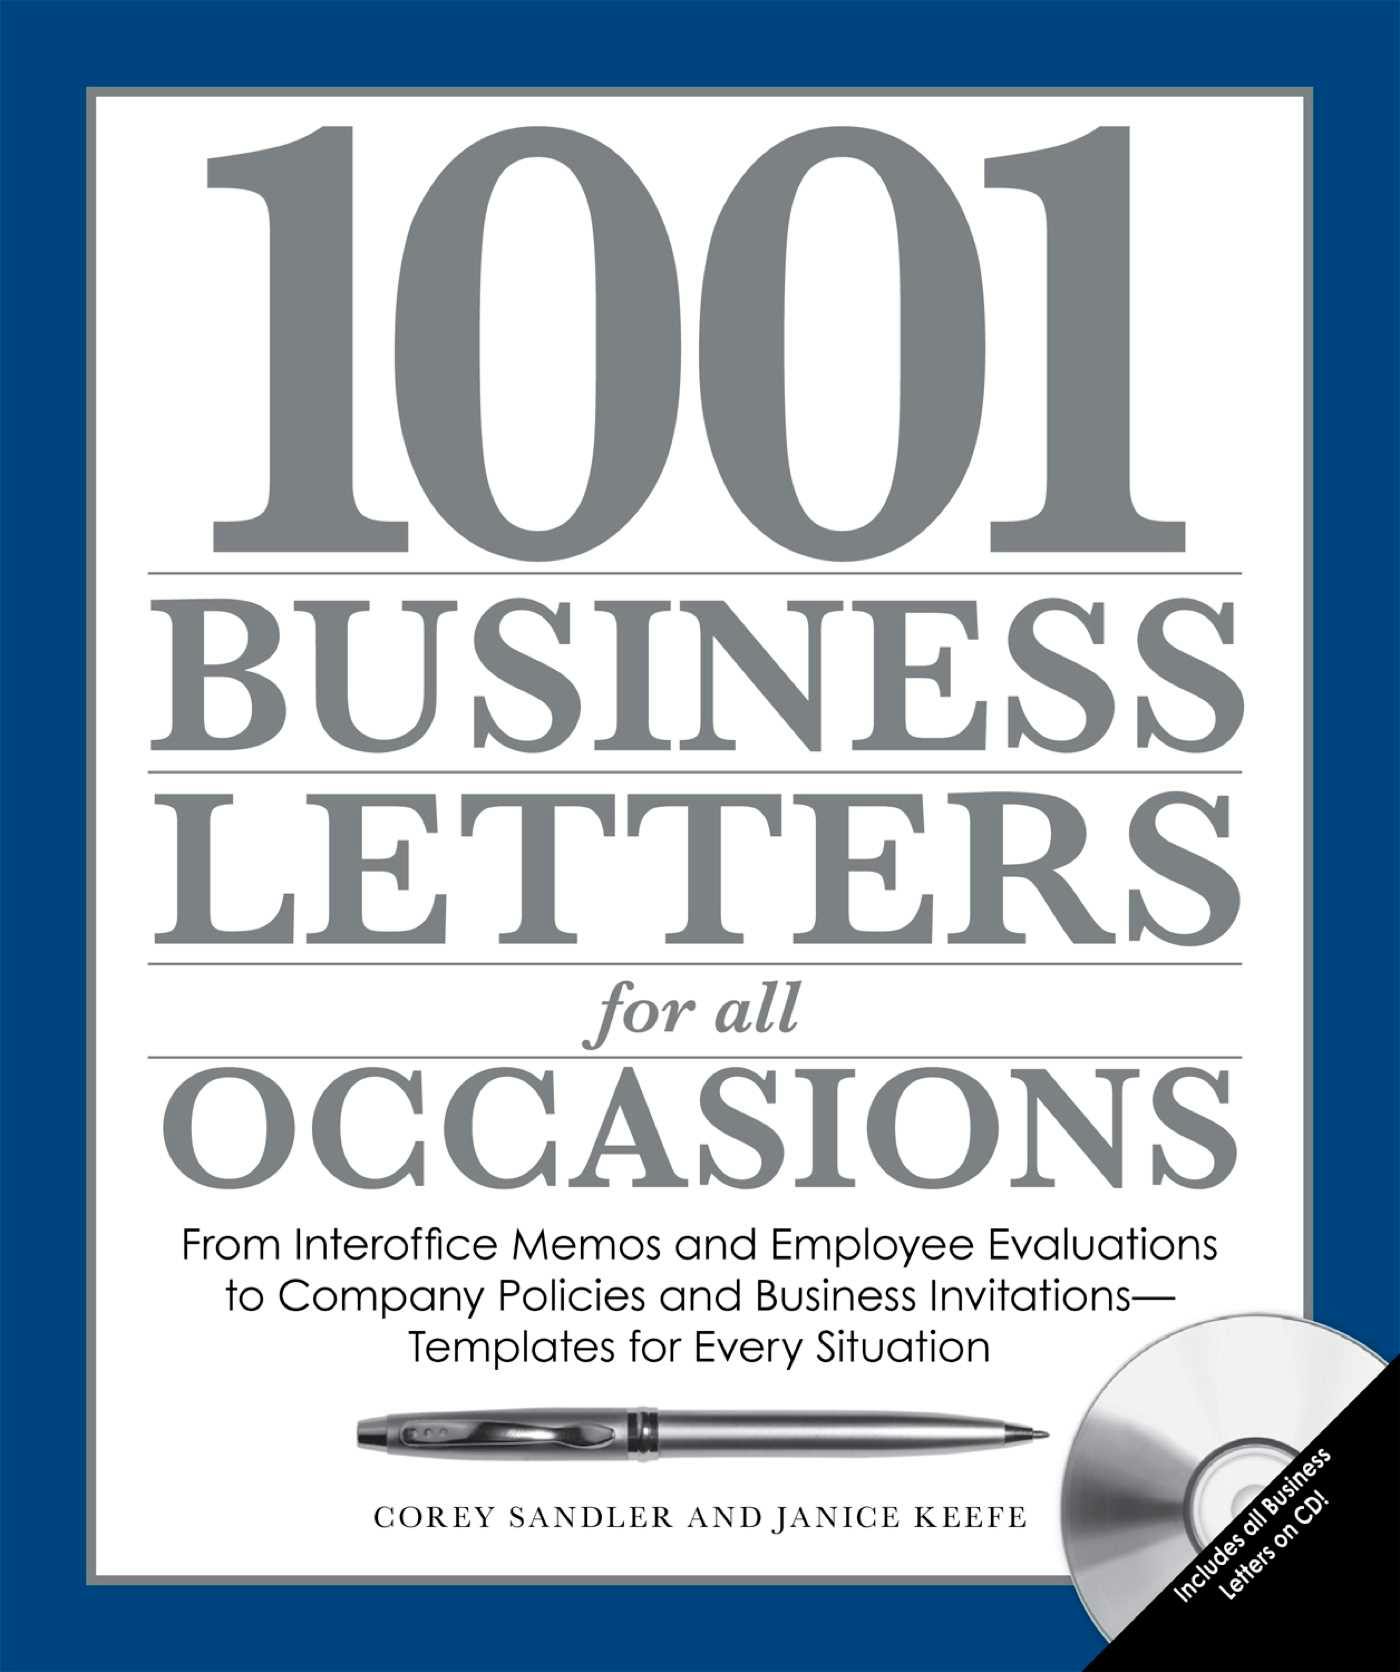 1001 Business Letters for All Occasions: From Interoffice Memos and Employee Evaluations to Company Policies and Business Invitations - Templates for Every Situation - Corey Sandler, Janice Keefe